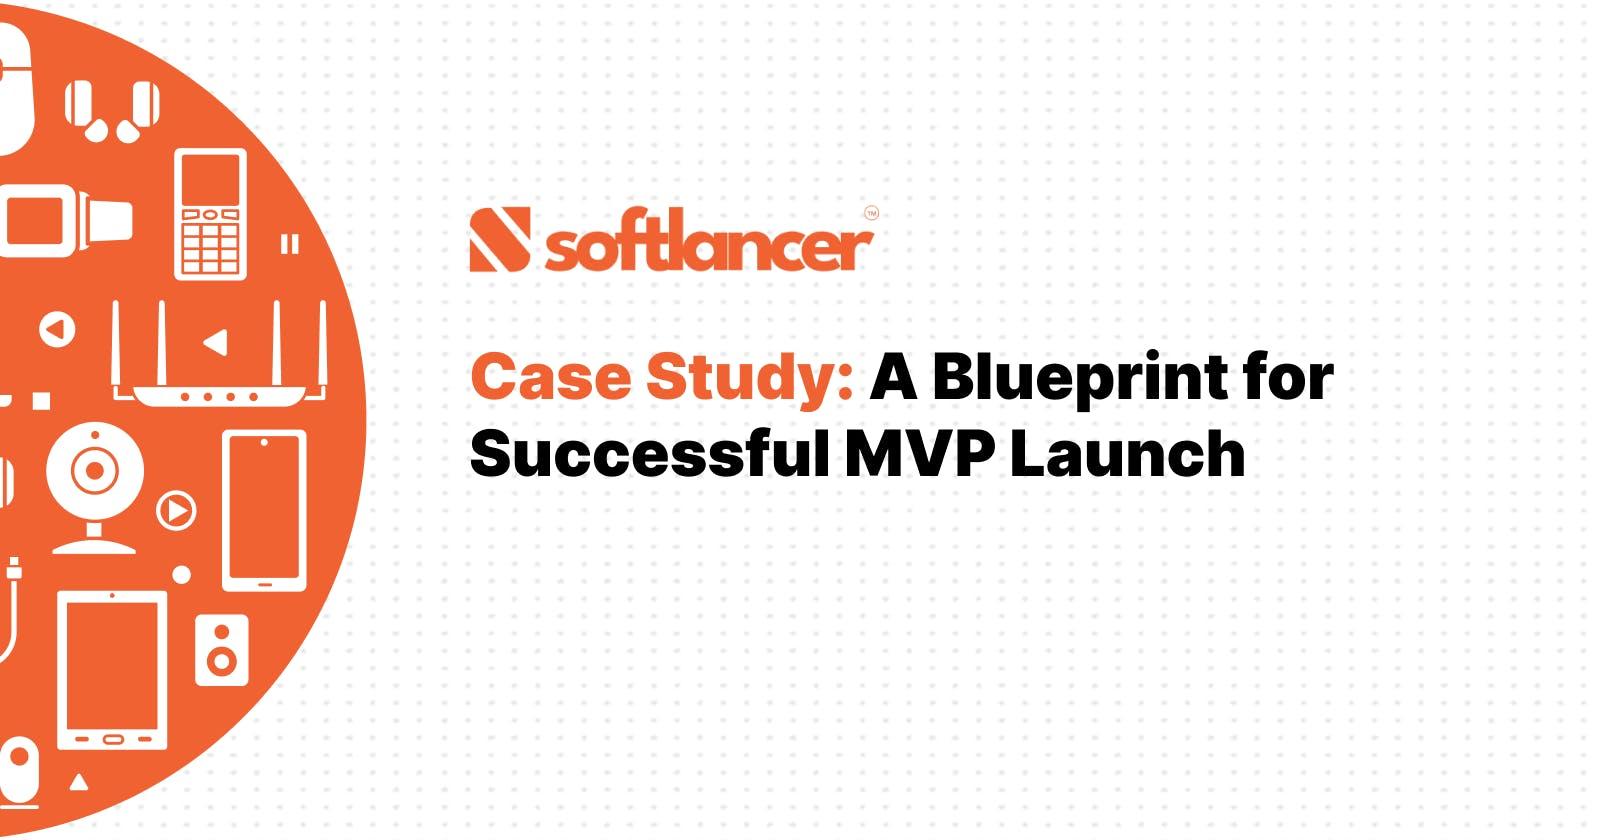 Case Study: A Blueprint for Successful MVP Launch